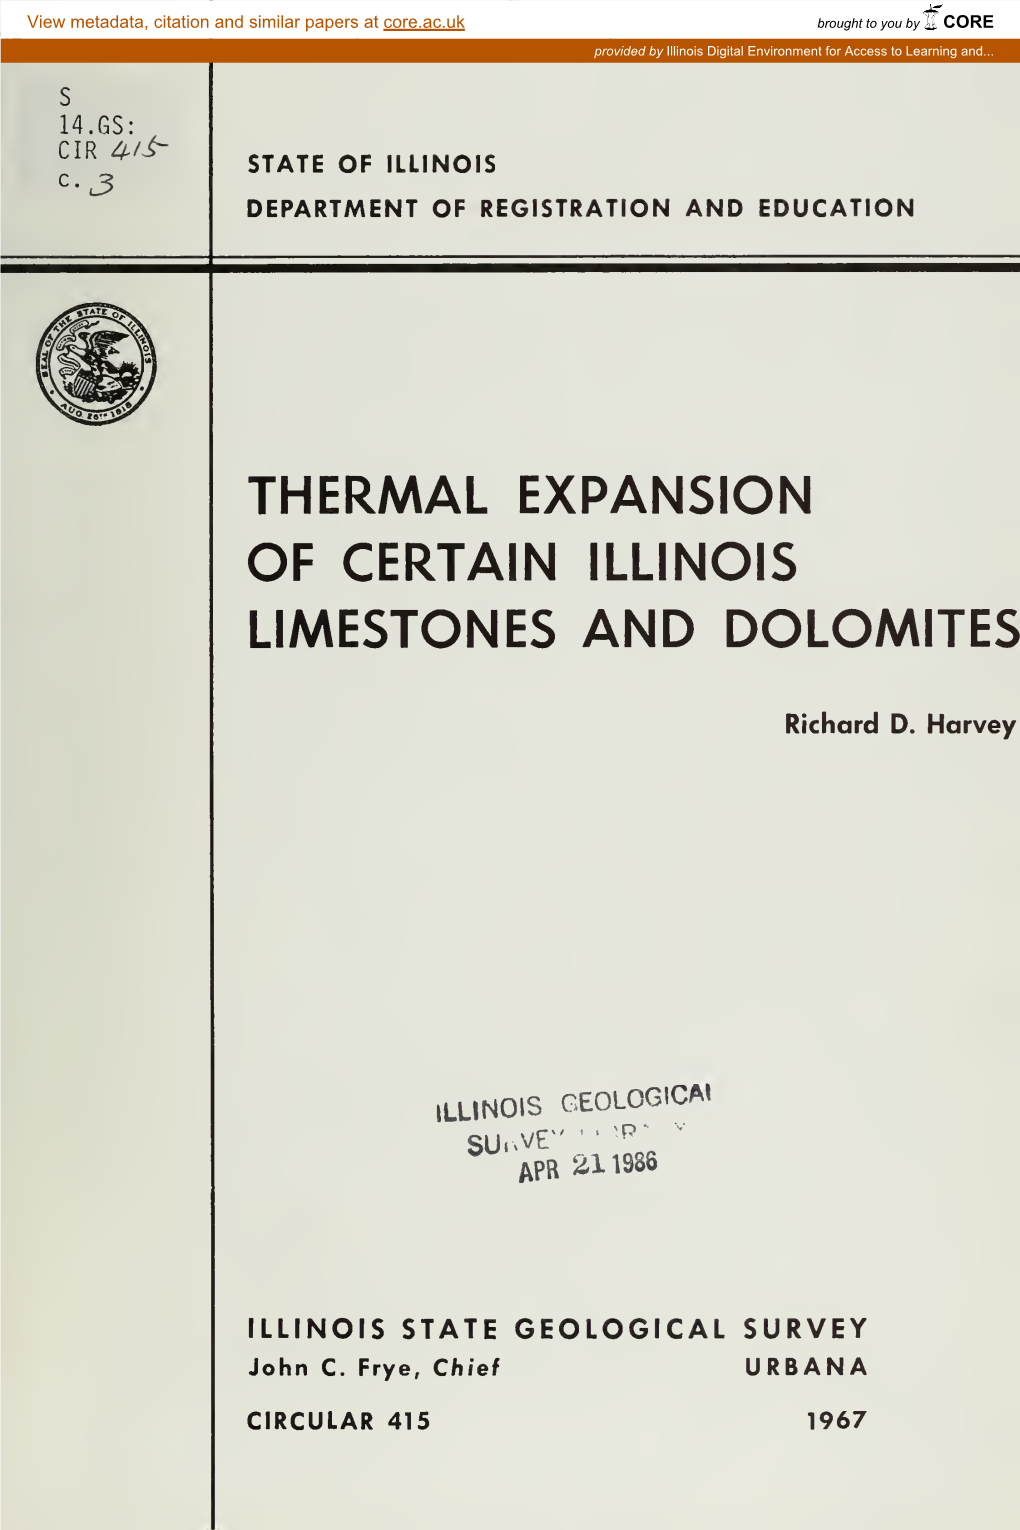 Thermal Expansion of Certain Illinois Limestones and Dolomites